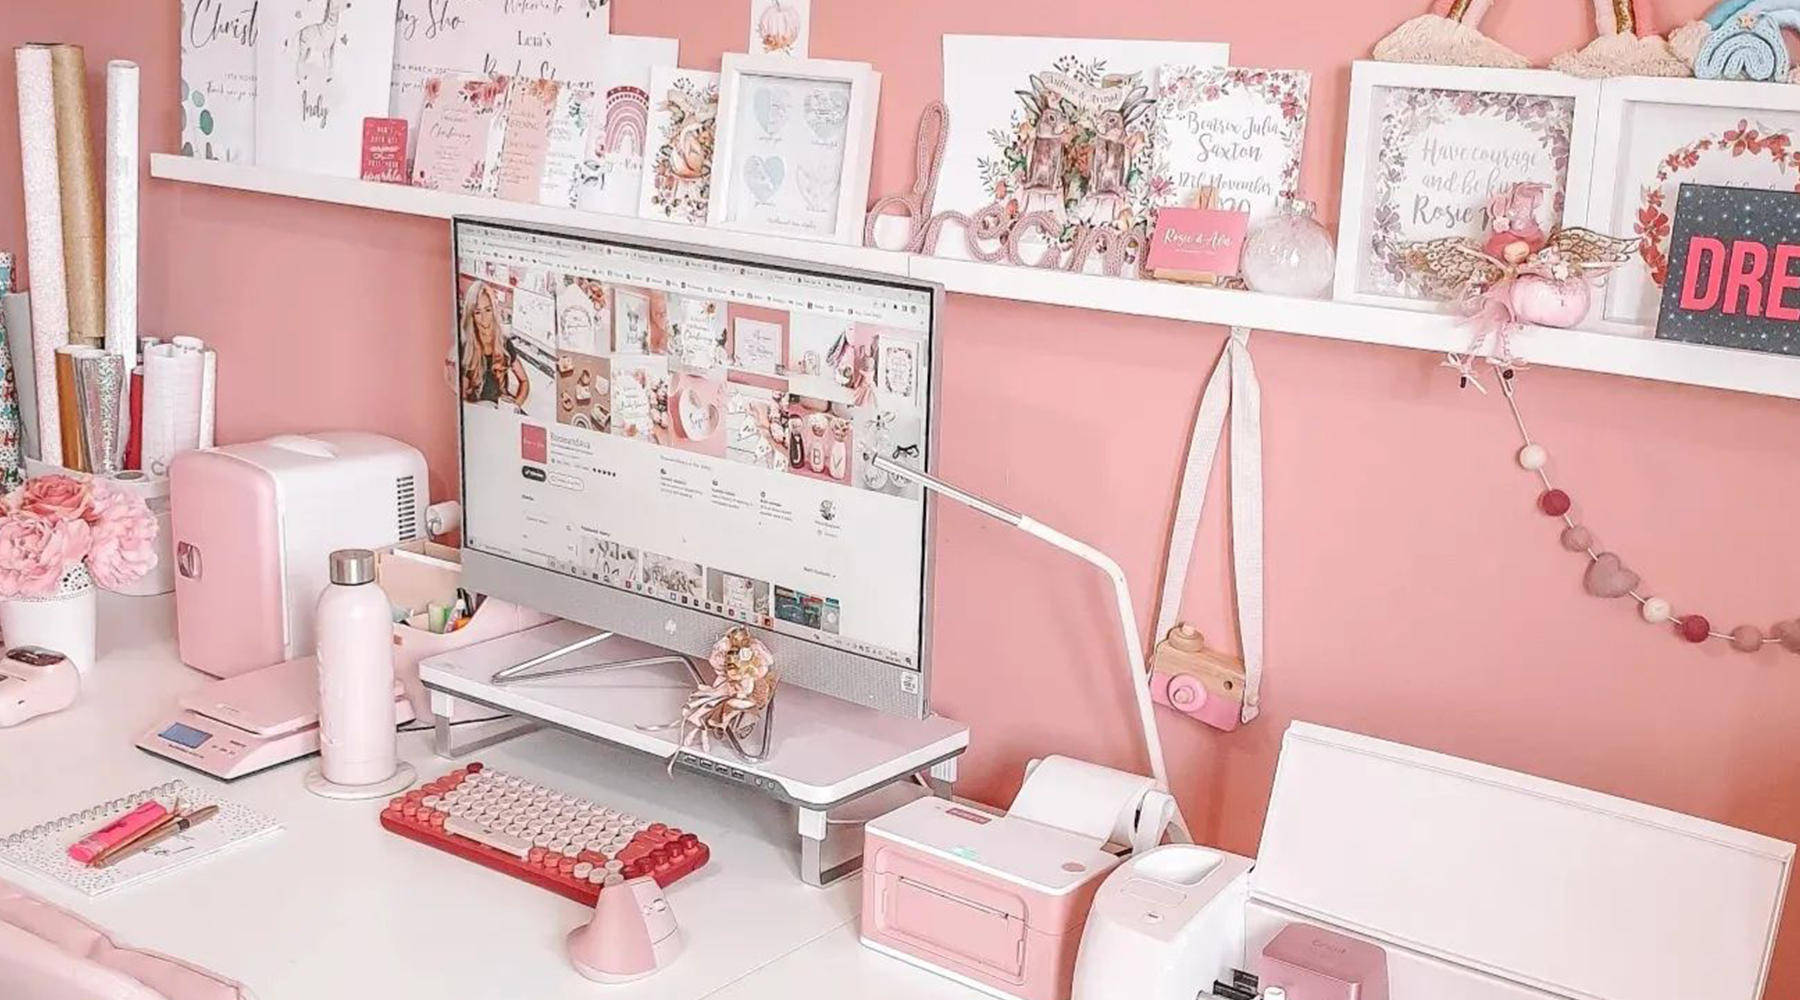 10 Simple Ways to Make Your Home Office Desk Unique